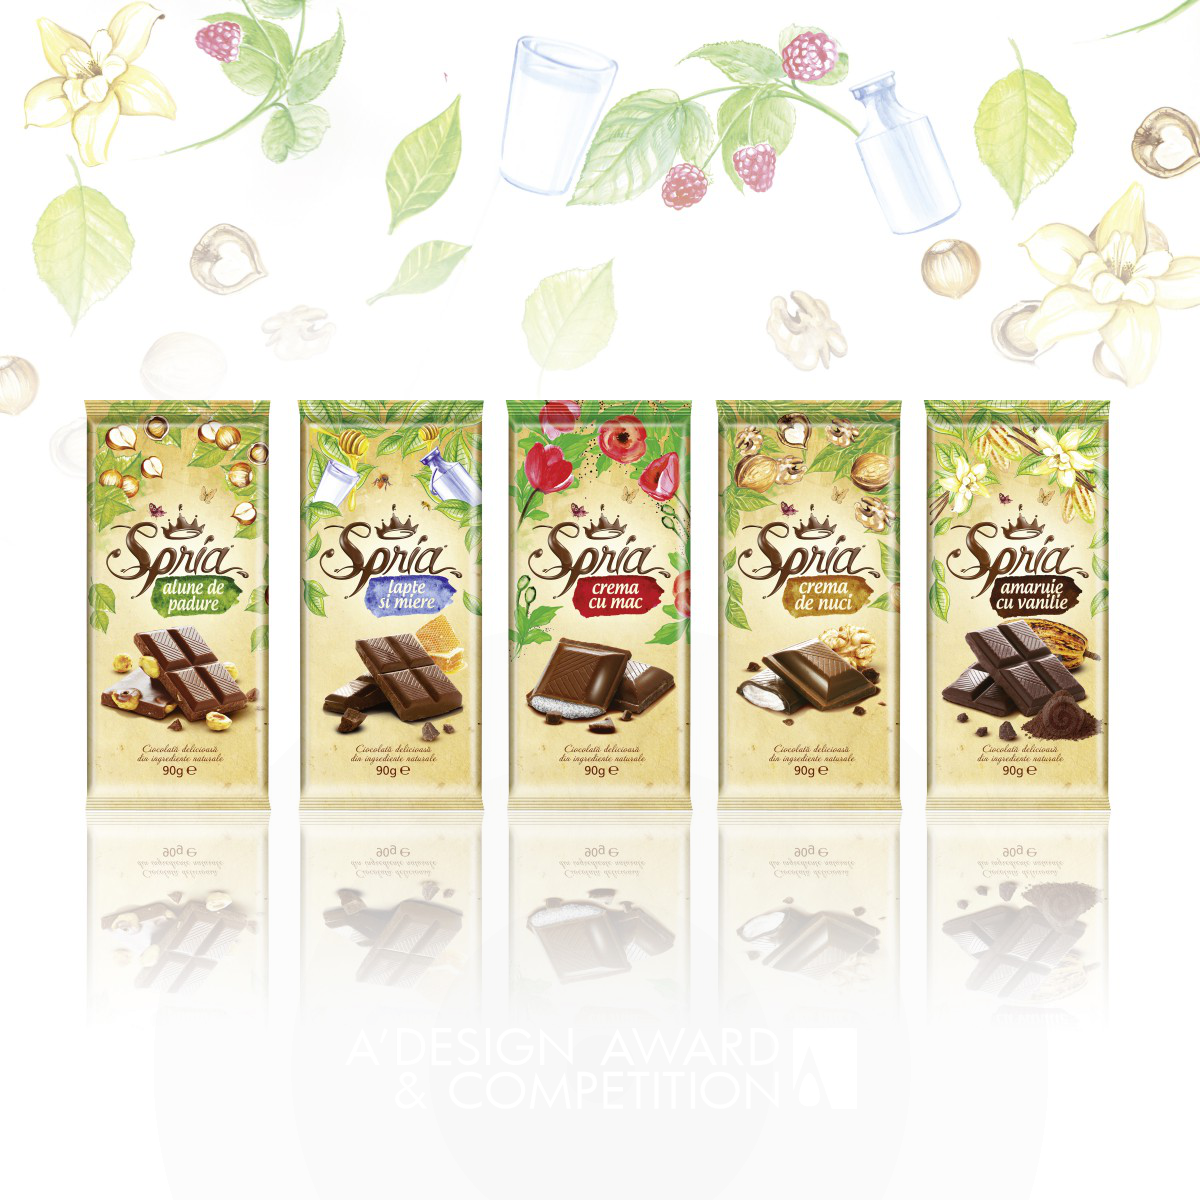 Spria Chocolate Range of chocolate tablets by Ampro Design